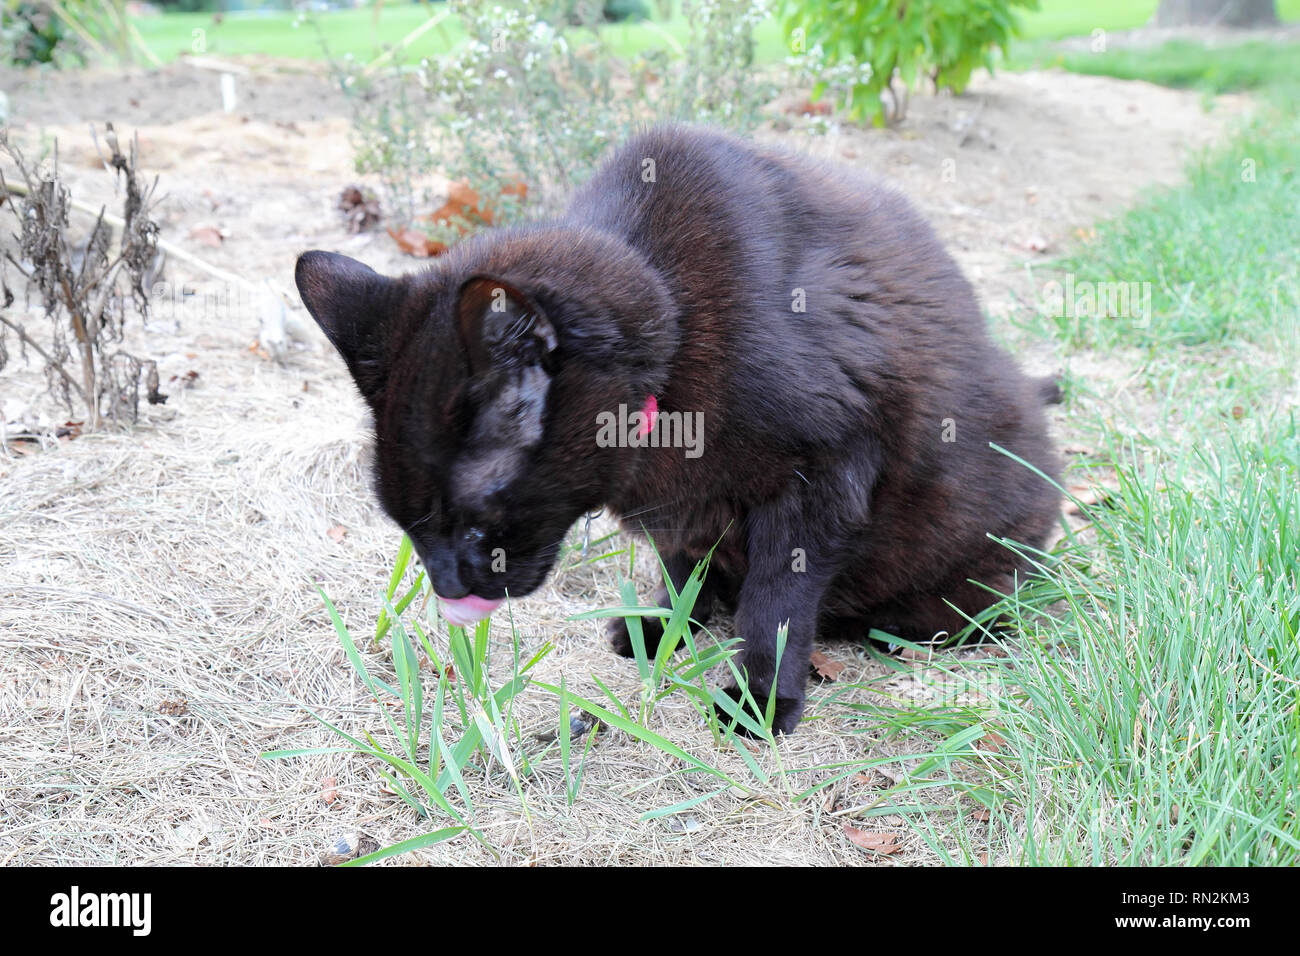 An all black domestic shorthair cat (Felis catus) with a red collar eats grass at the edge of a lawn Stock Photo